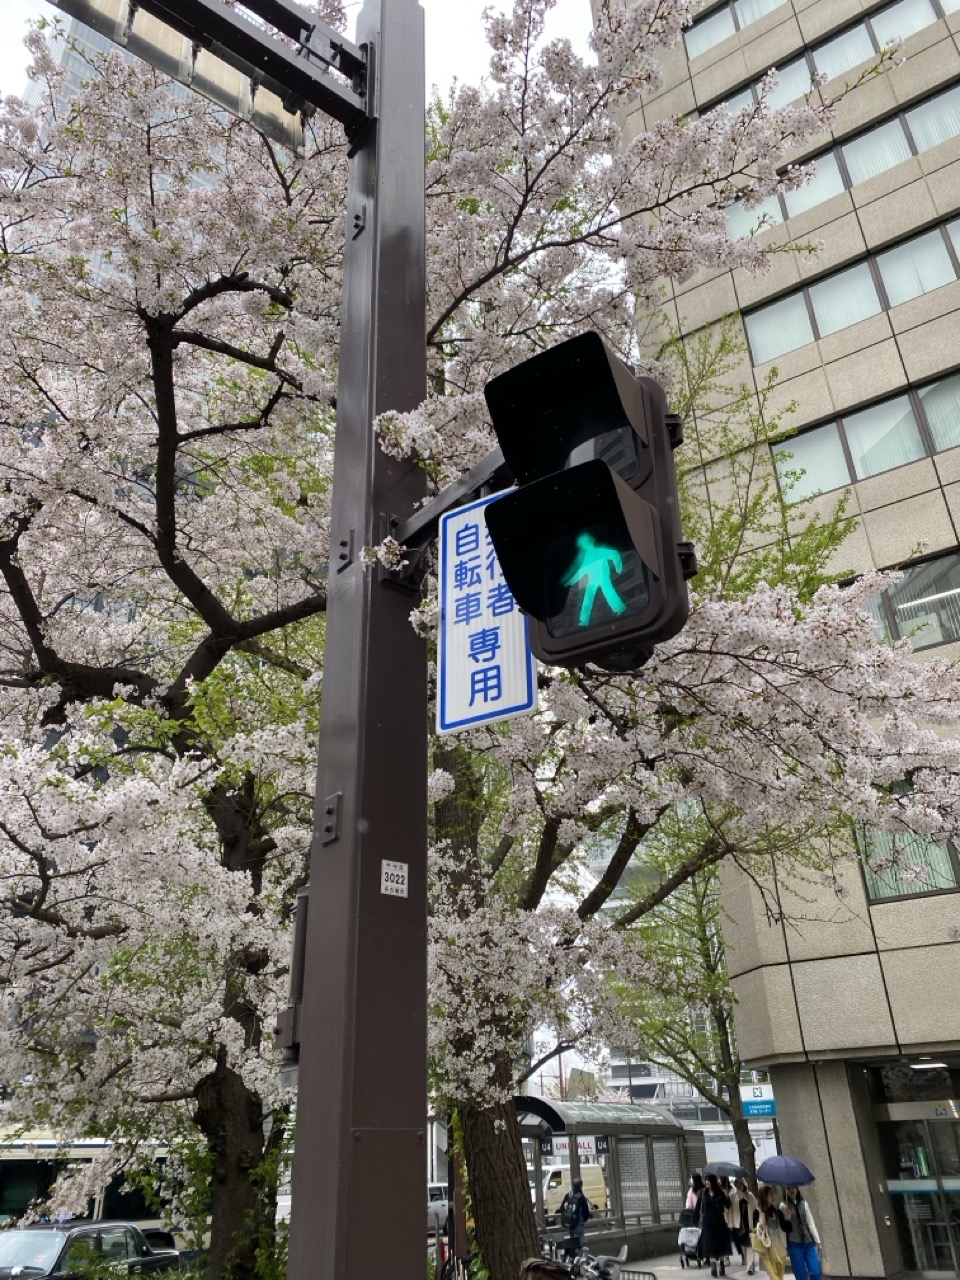 A green light at a crosswalk in Nagoya, with sakura in the background